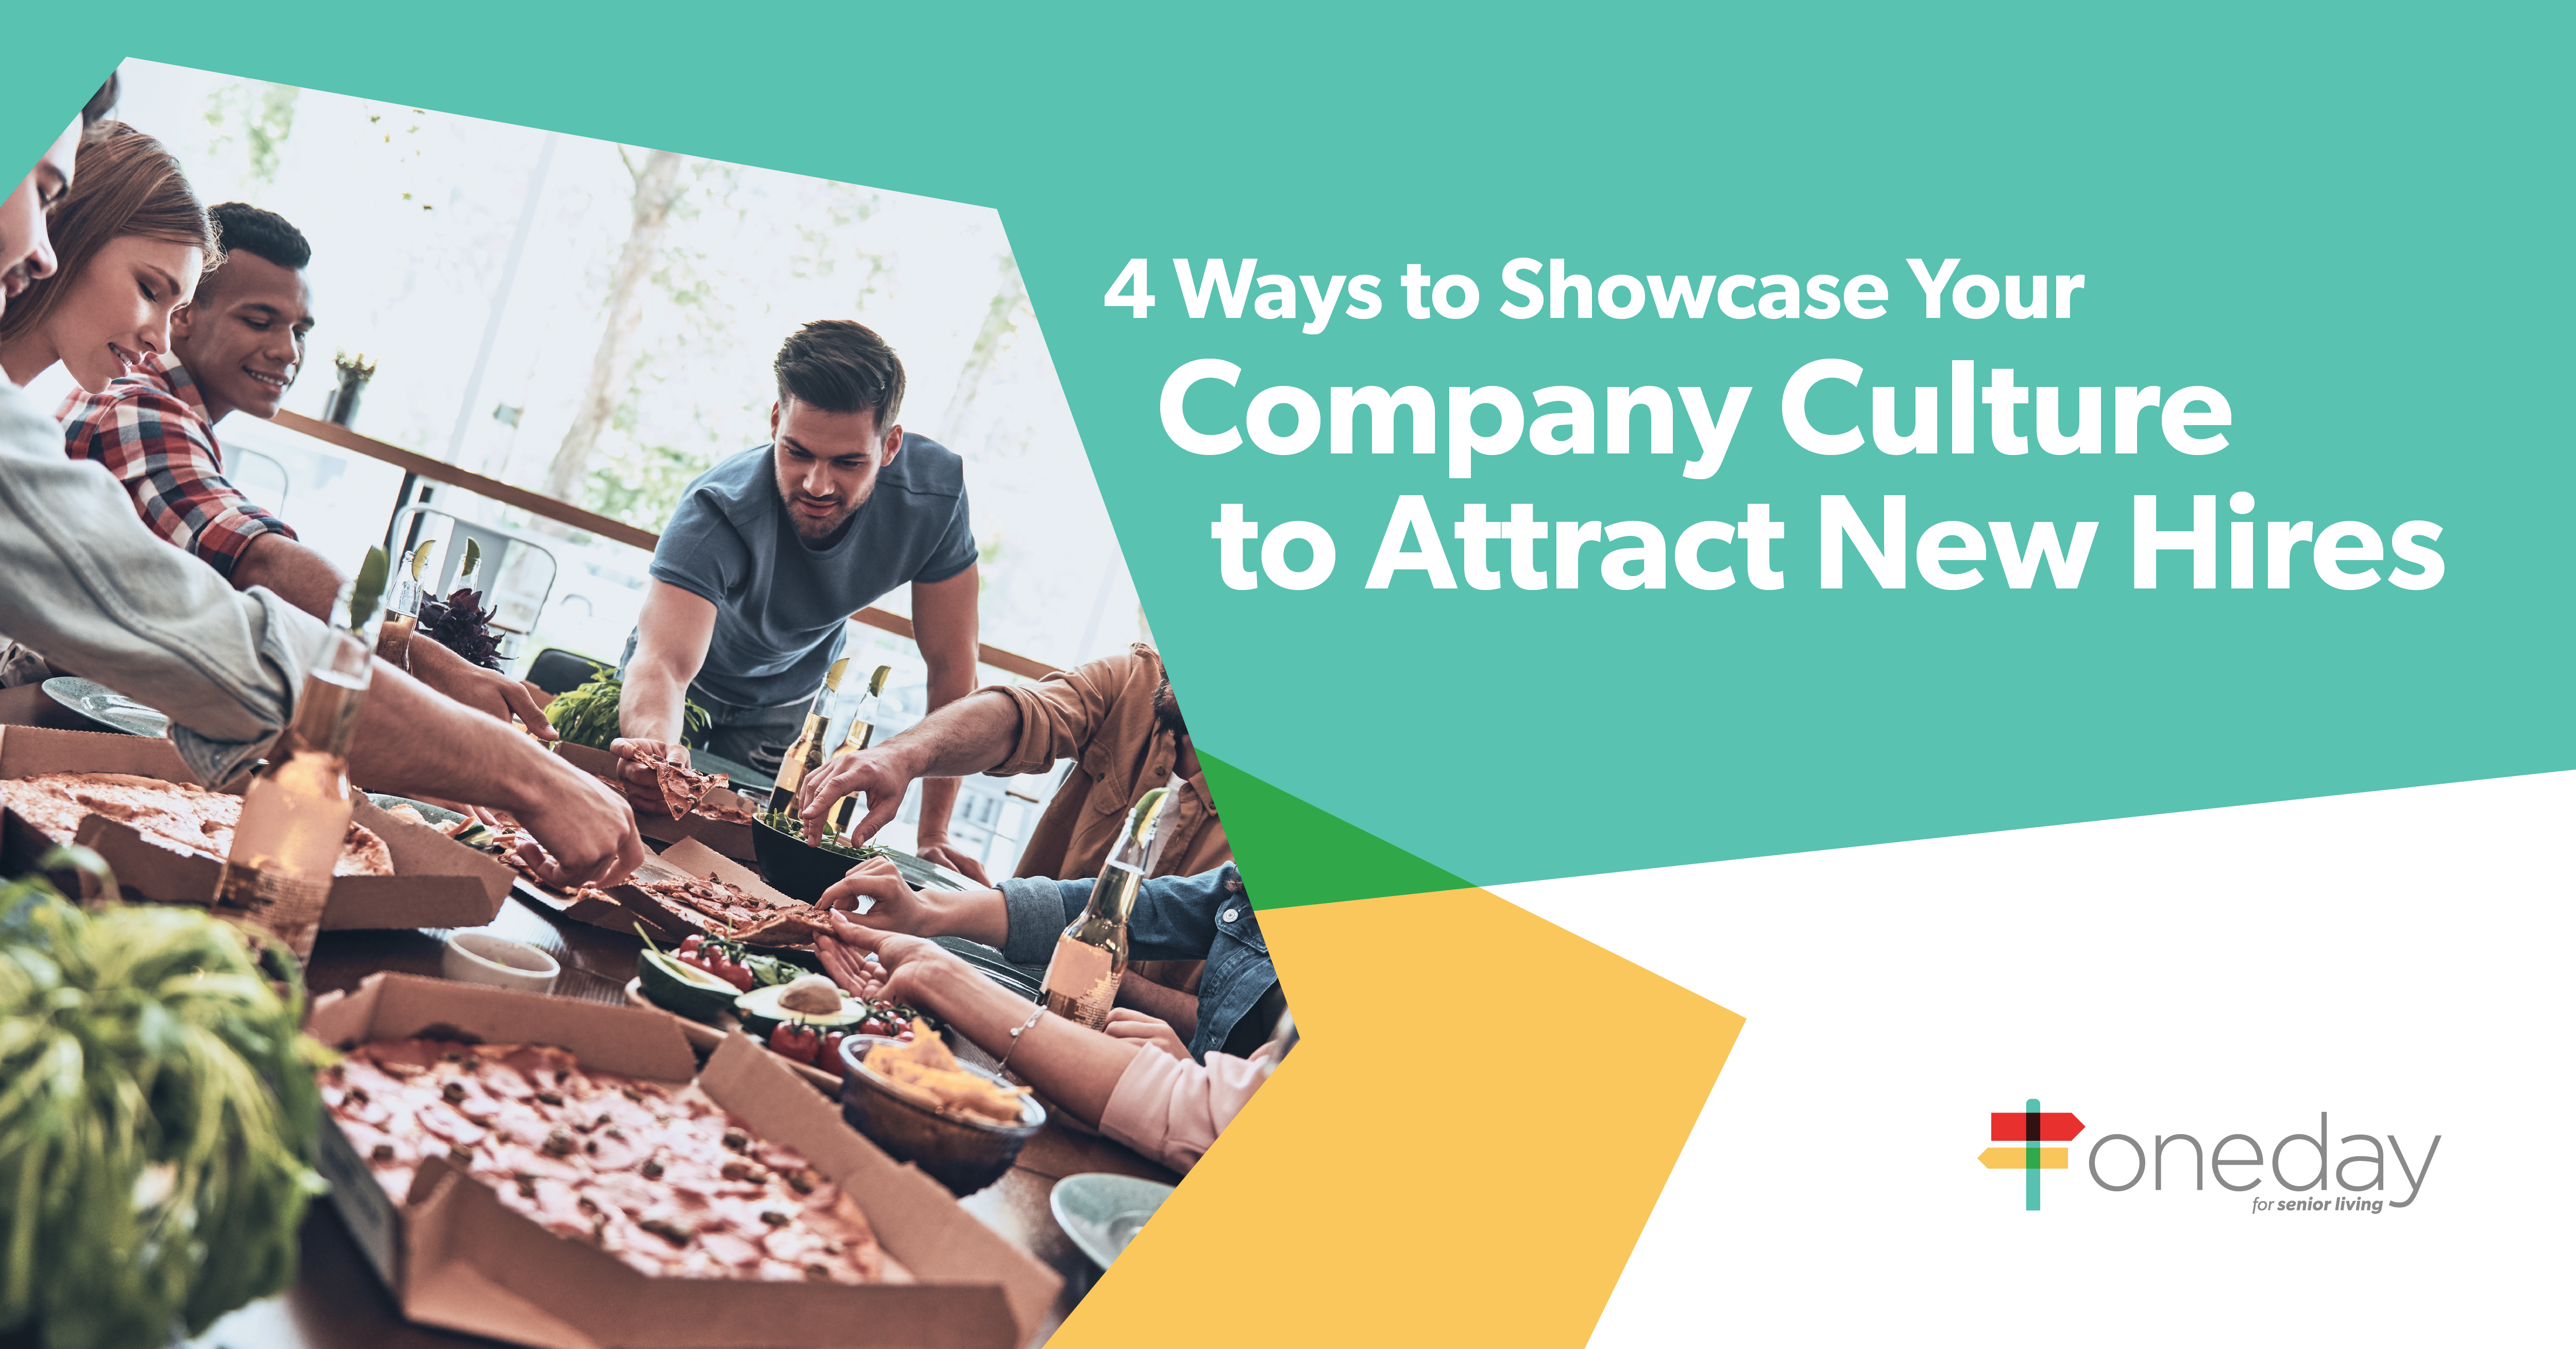 Insights and best practices on simple but effective ways your community can use video to showcase your company culture and transform it into a powerful recruiting edge.